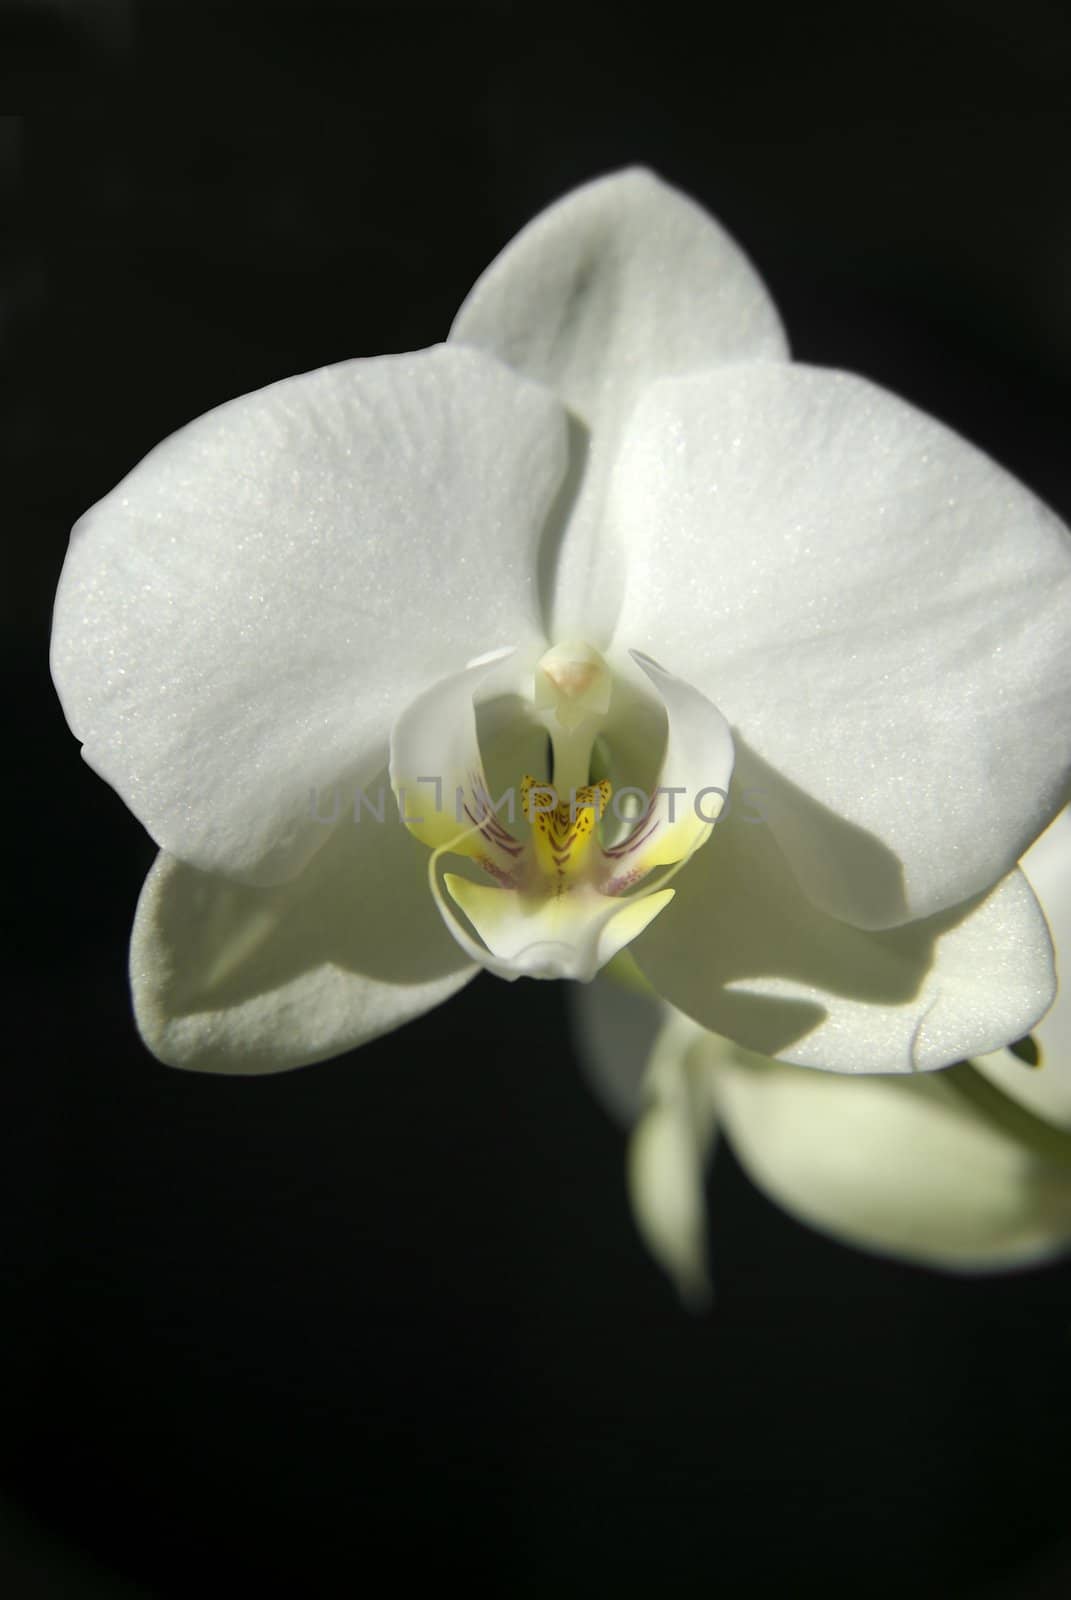 A close up of a lovely white Orchid in full bloom